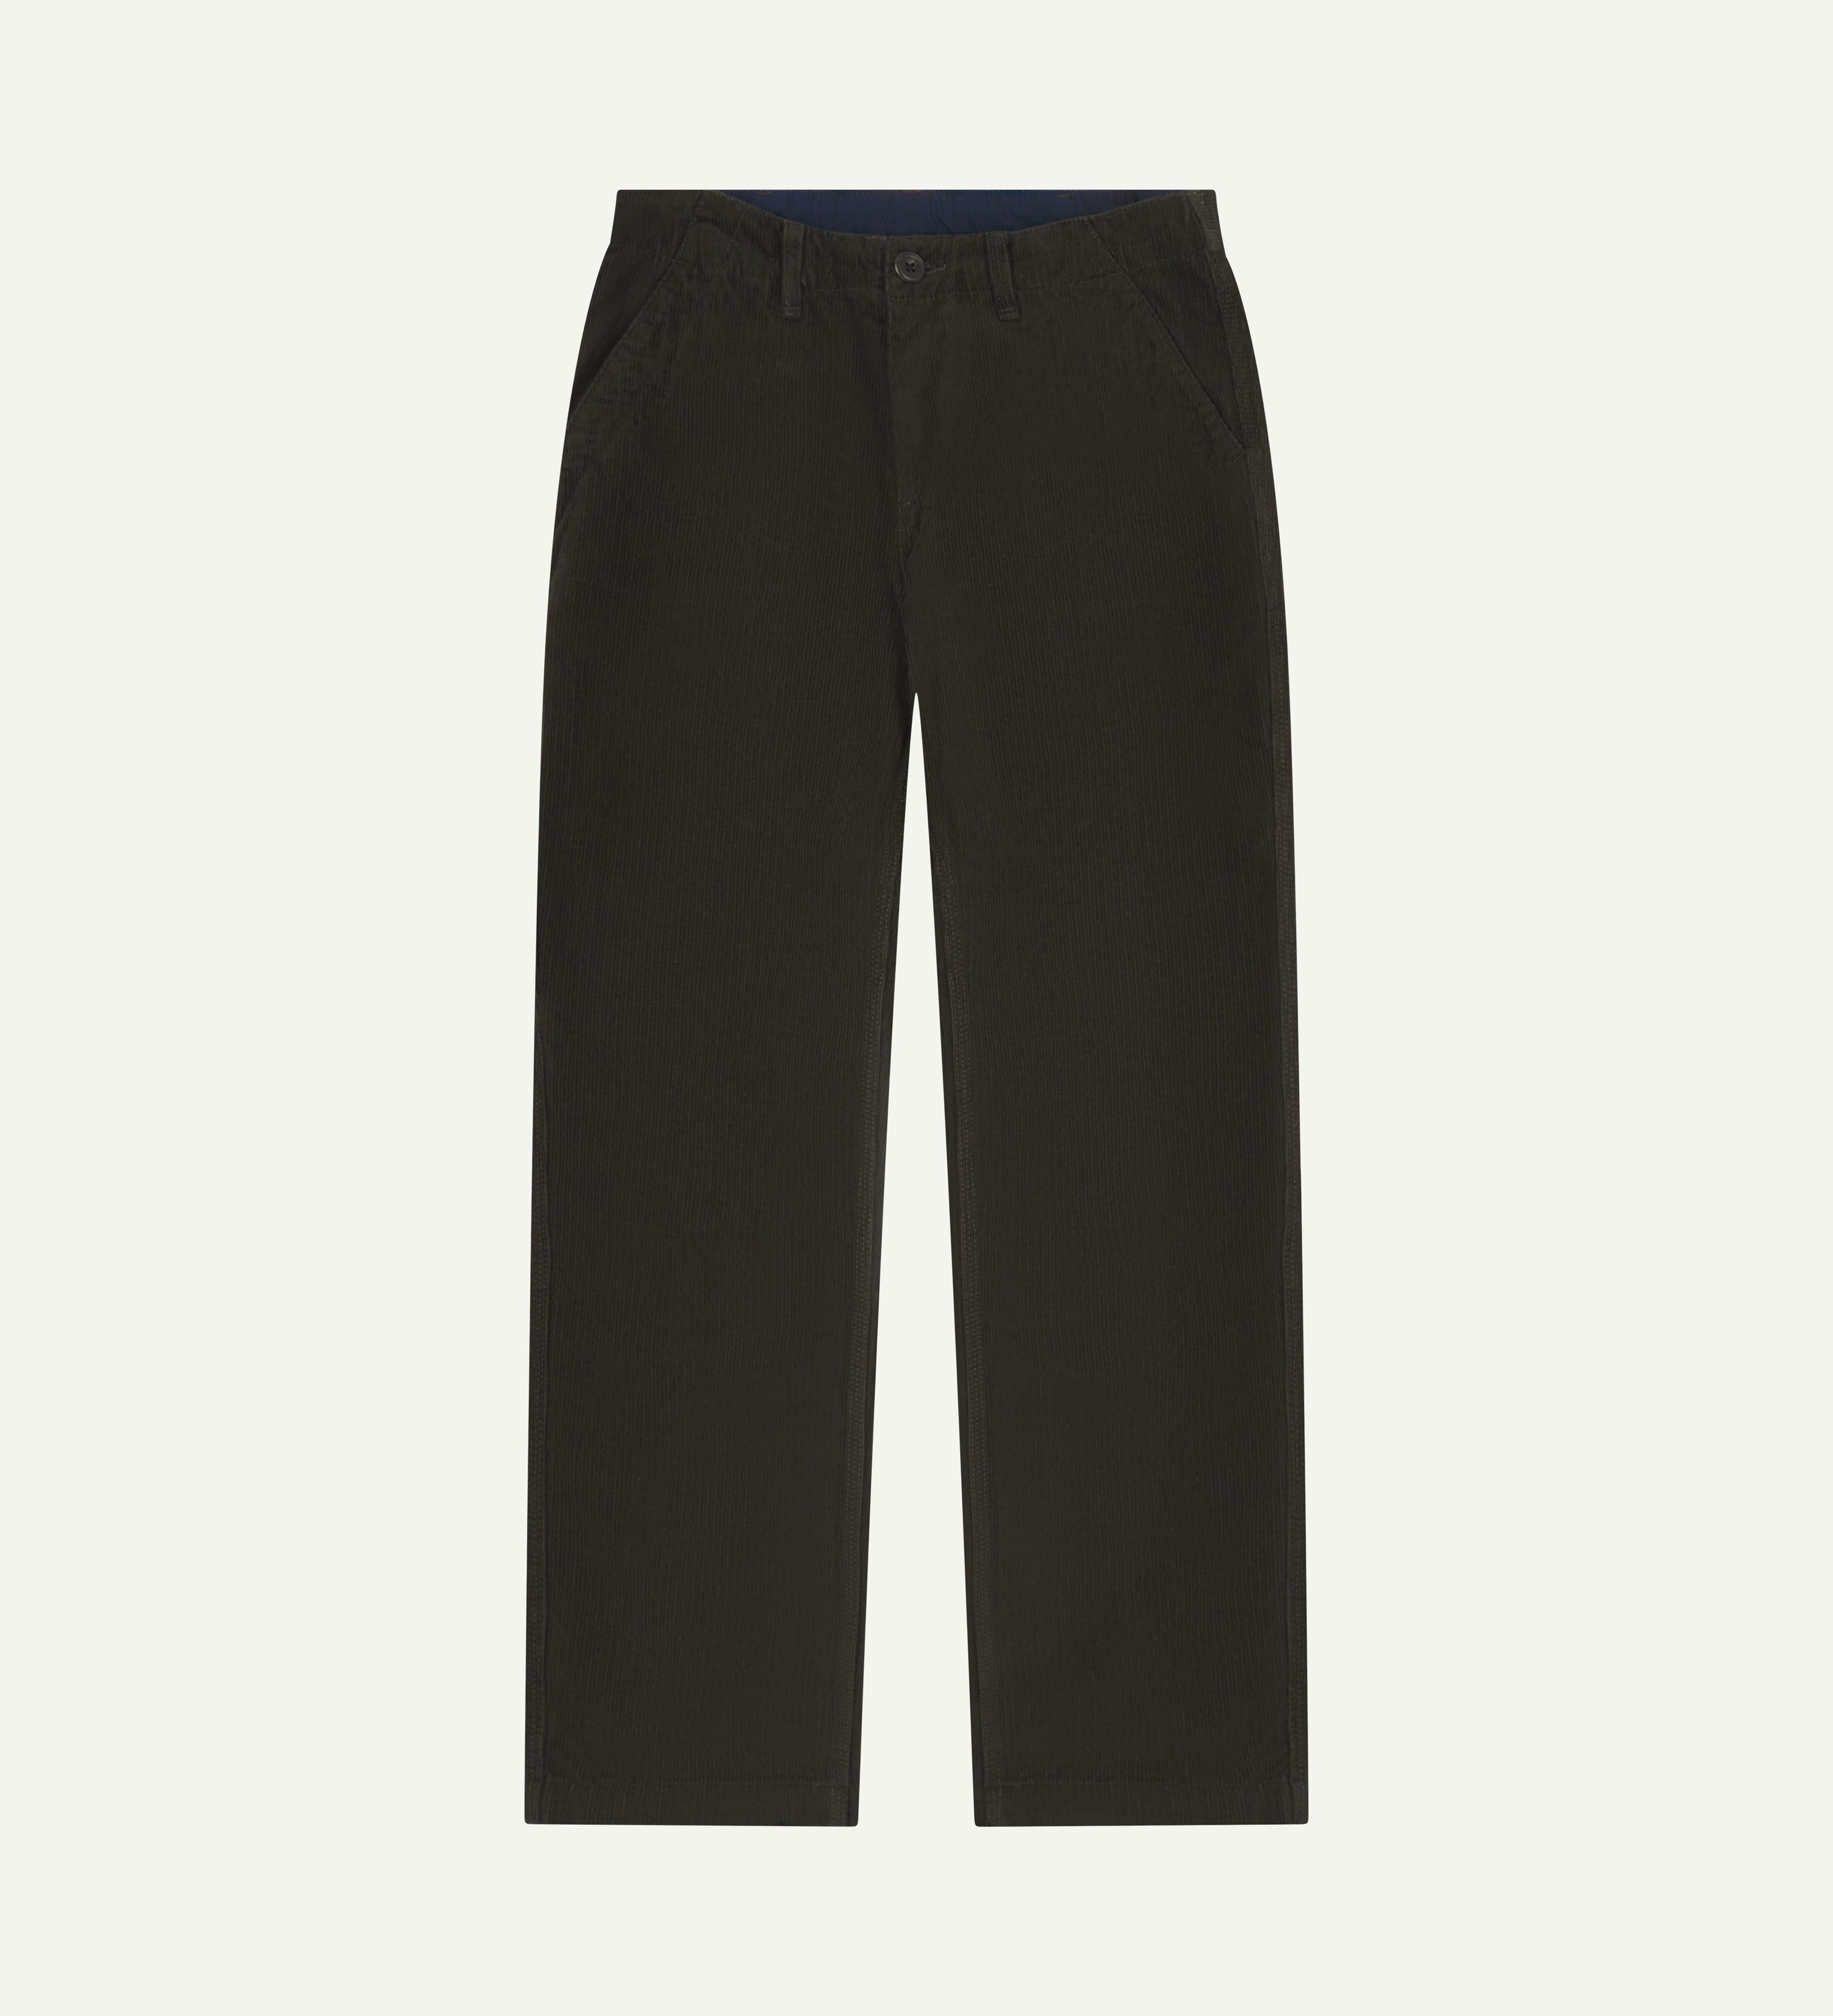 Uskees #5012 men's organic cord 'faded black' casual trousers with a view of adjustable waistband with corozo button detailing.